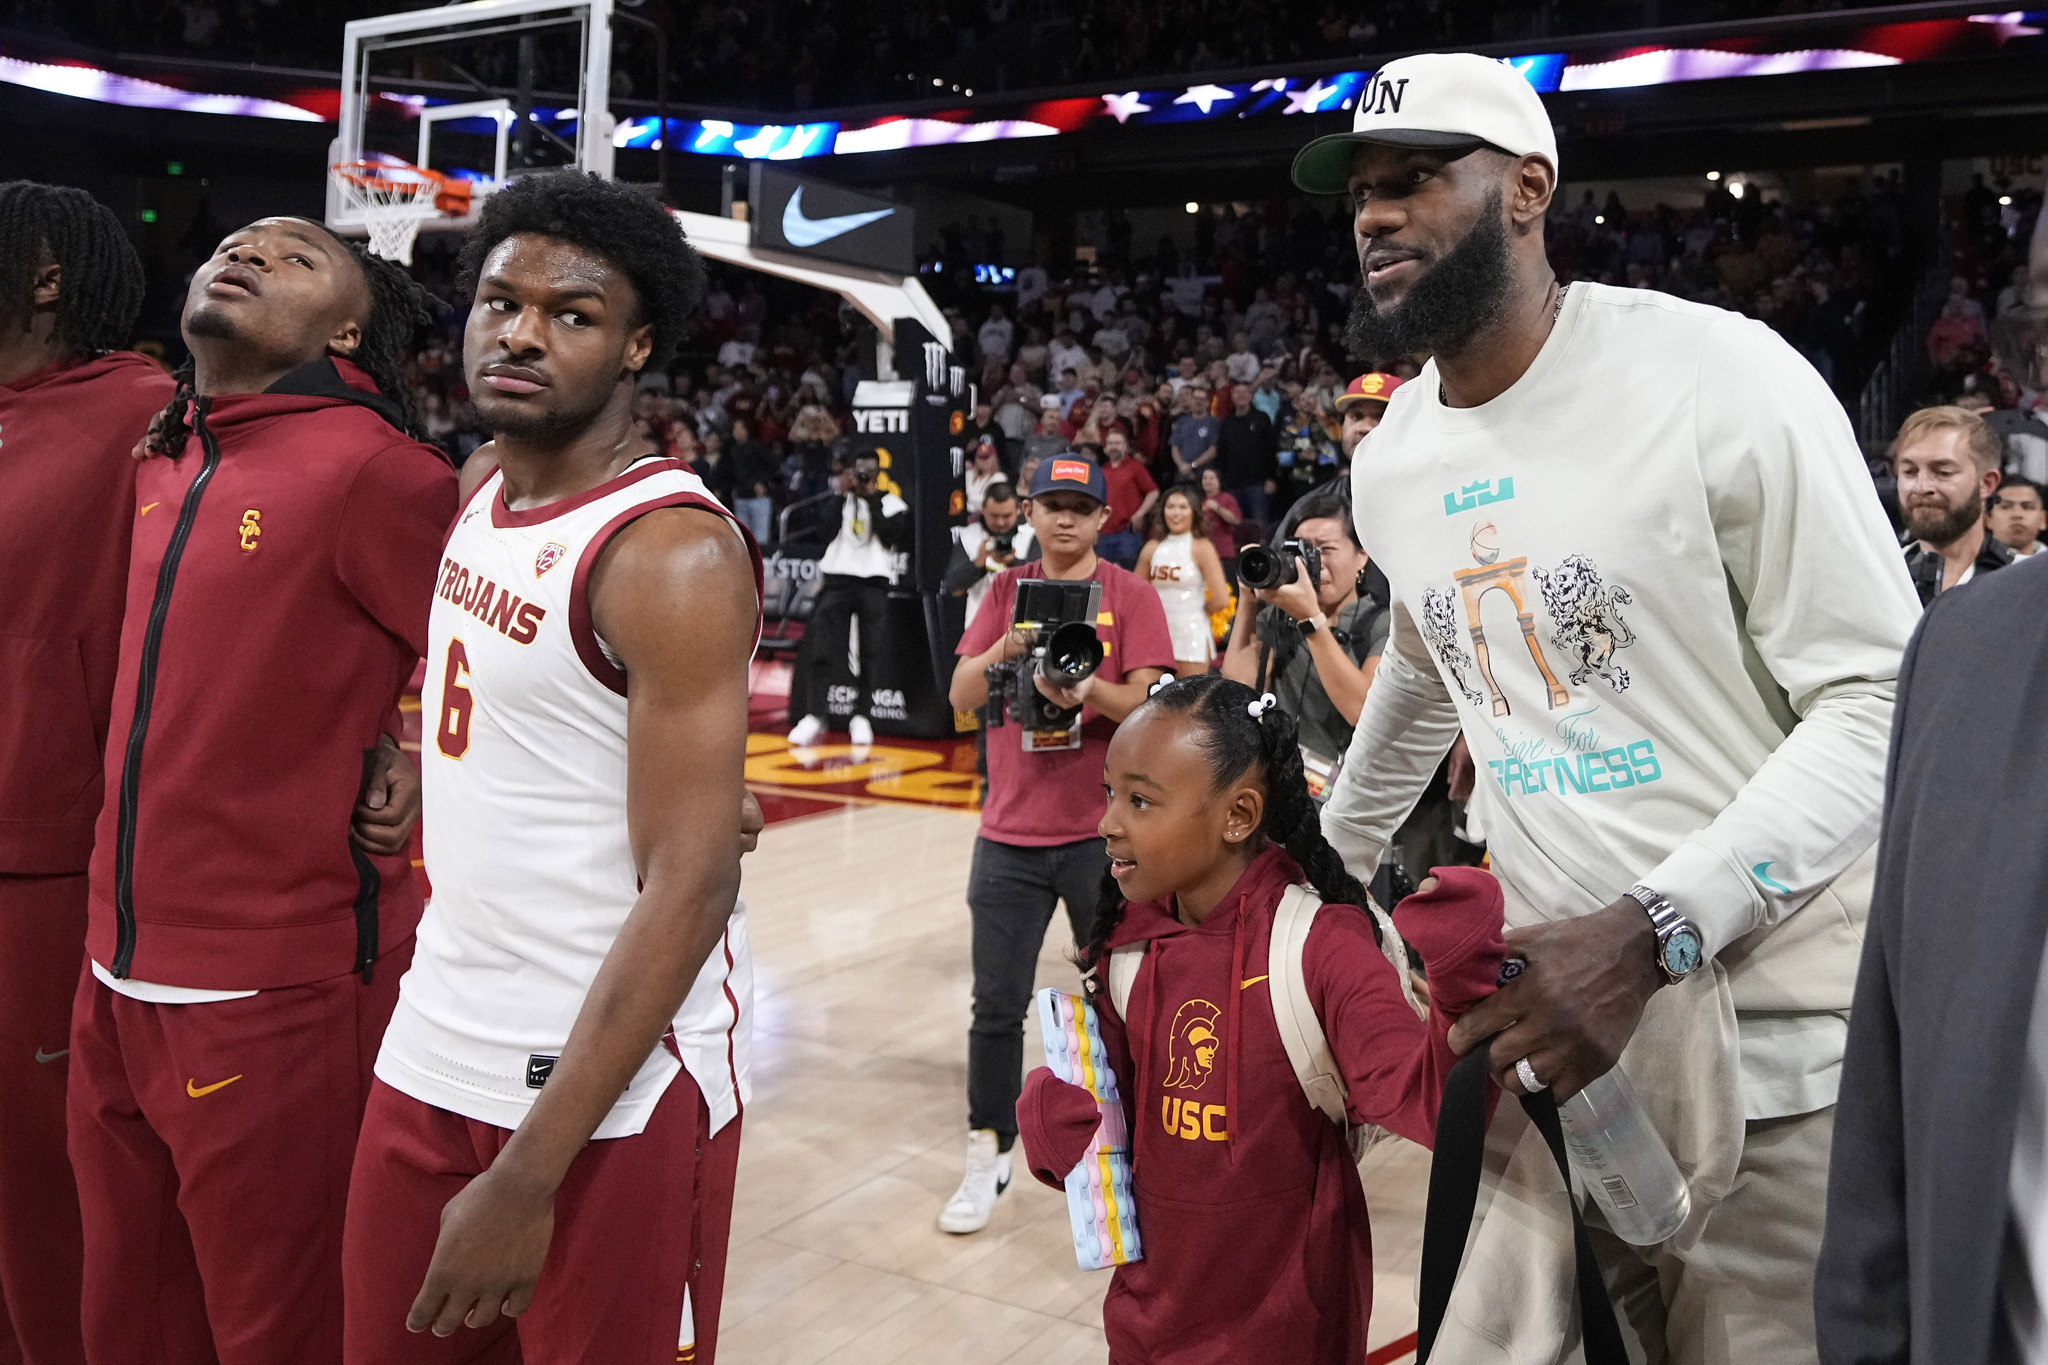 Southern California guard Bronny James stands on the court with the rest of his team as his father, LeBron James walks by prior to an NCAA college basketball game against Long Beach State Sunday, Dec. 10, 2023, in Los Angeles. (AP Photo/Mark J. Terrill)